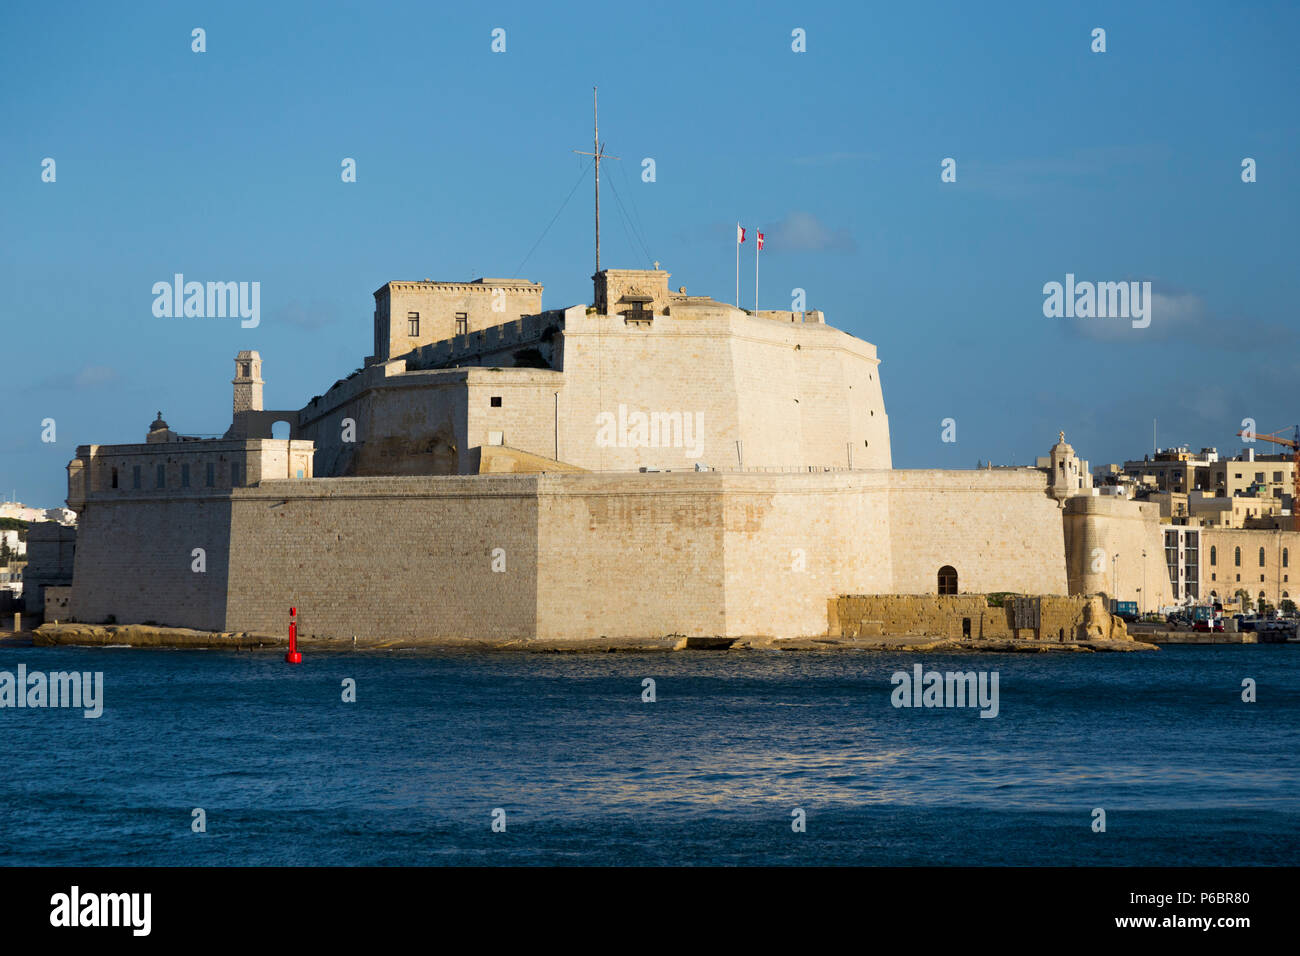 Fort St. Angelo / Fort Saint Angelo is a bastioned fort in Birgu, Malta, located at the centre of the Grand Harbour. Island of Malta. (91) Stock Photo